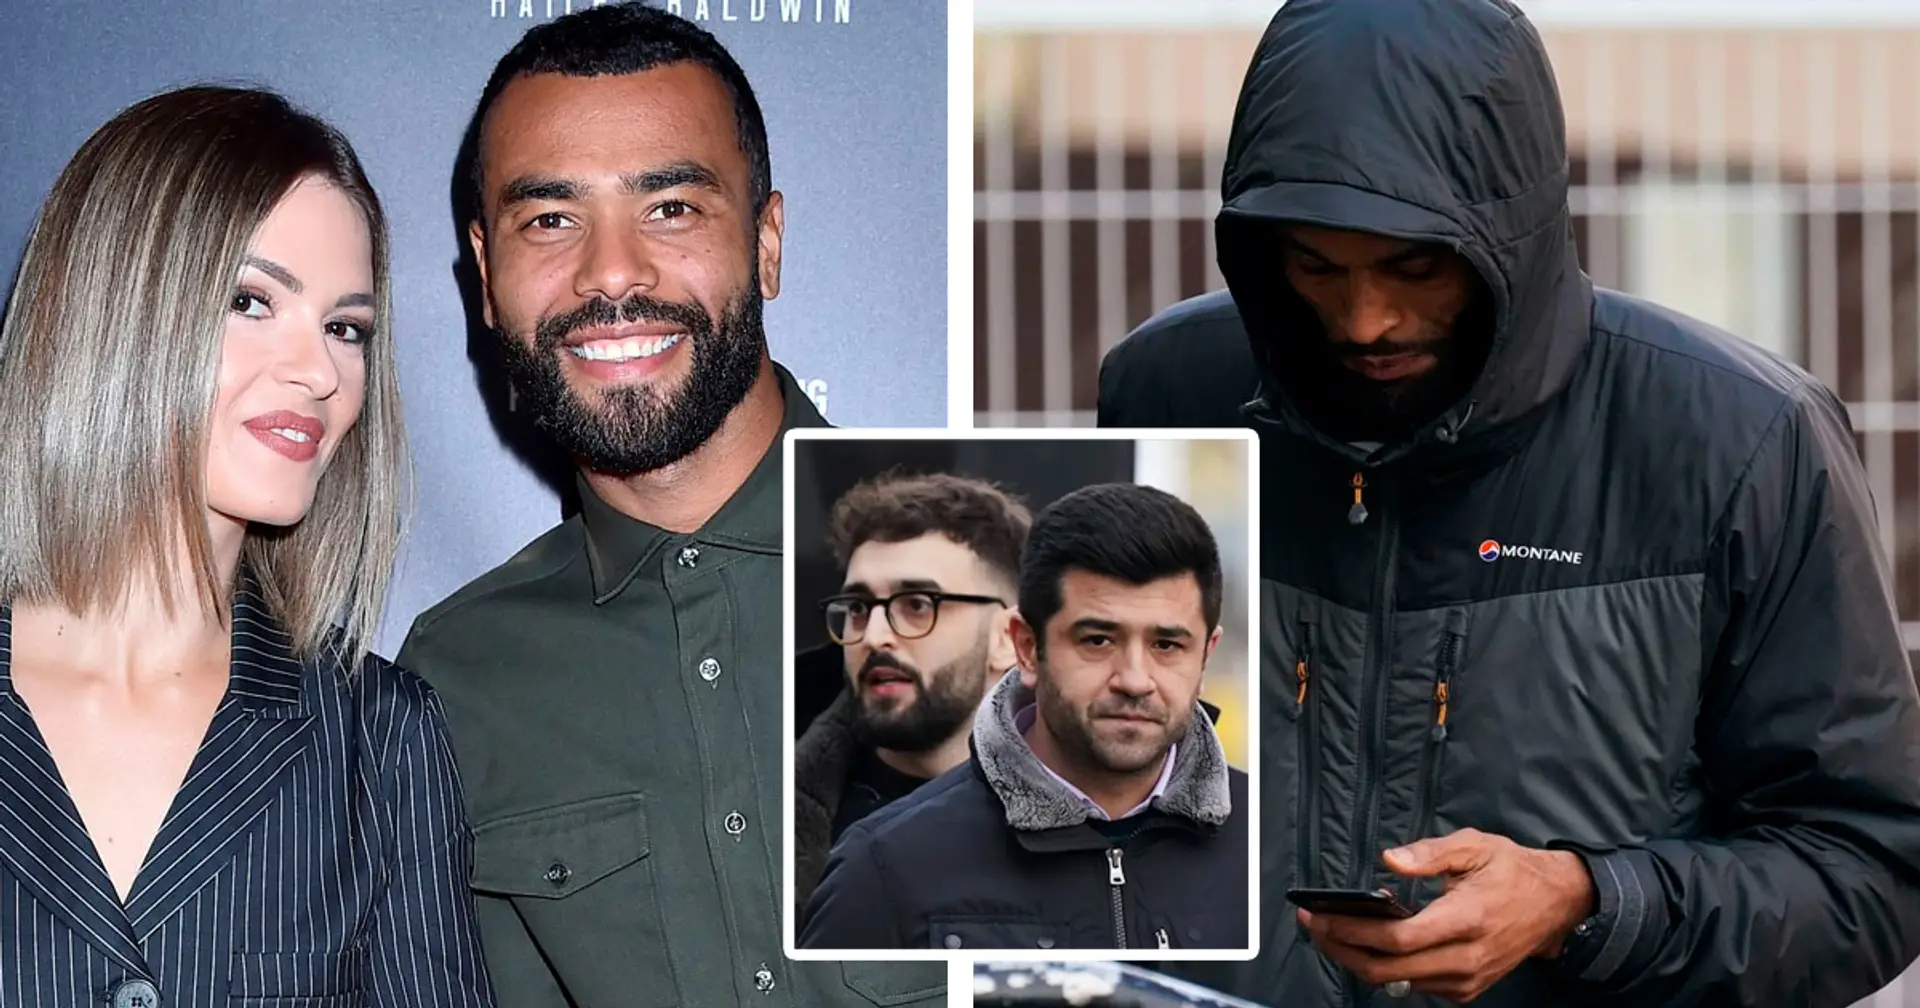 Ex-Chelsea defender Ashley Cole 'threatened to have his fingers cut off' during violent robbery